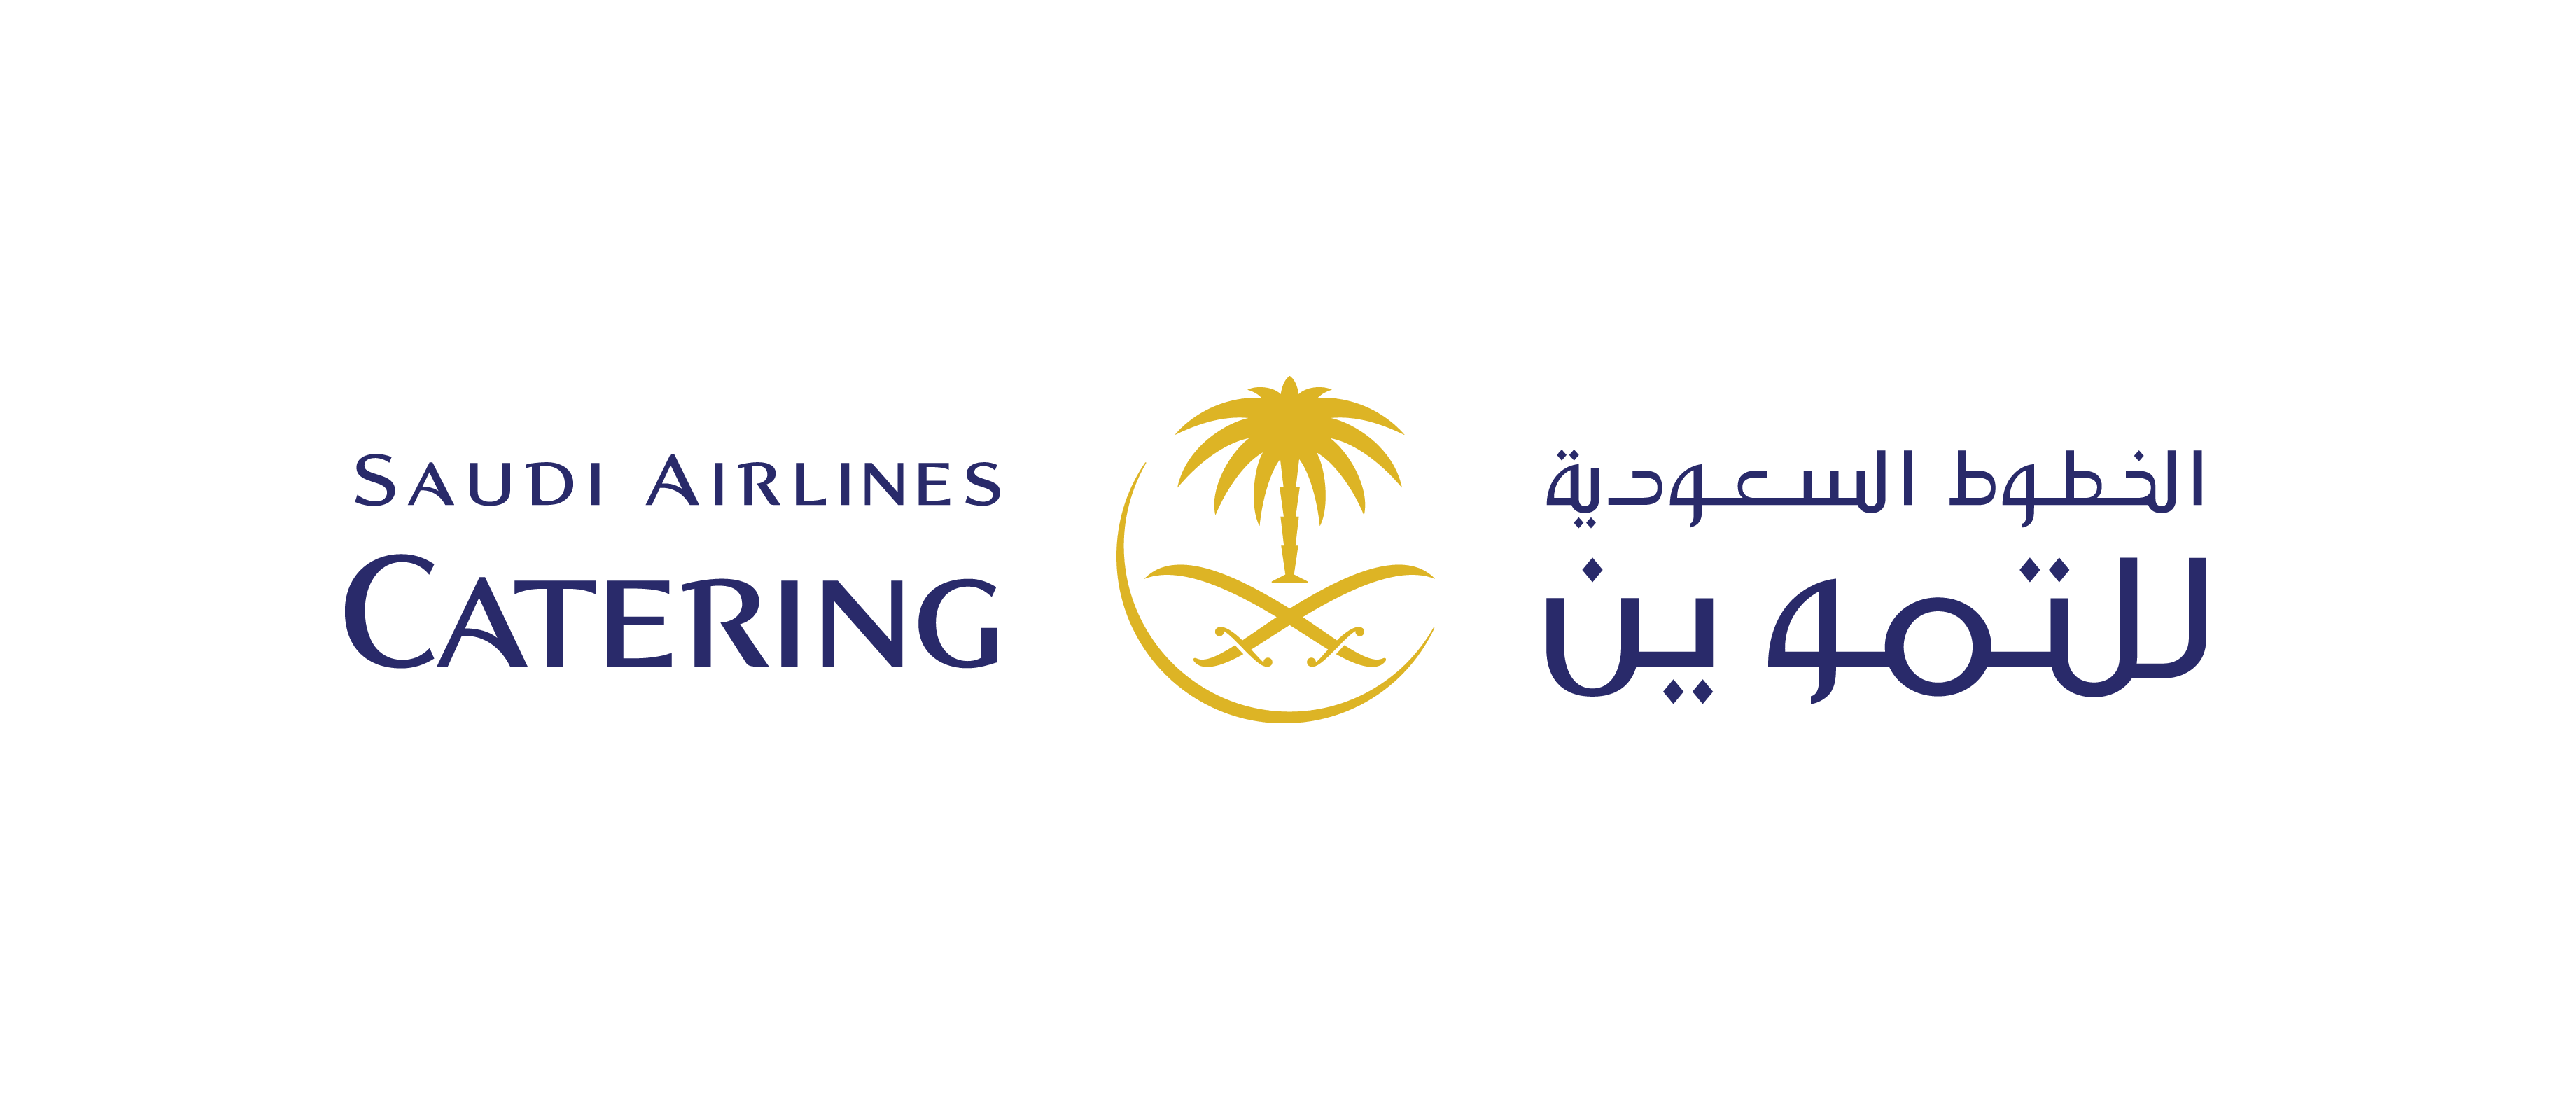 Saudi-Airline-Catering-Small133201615941